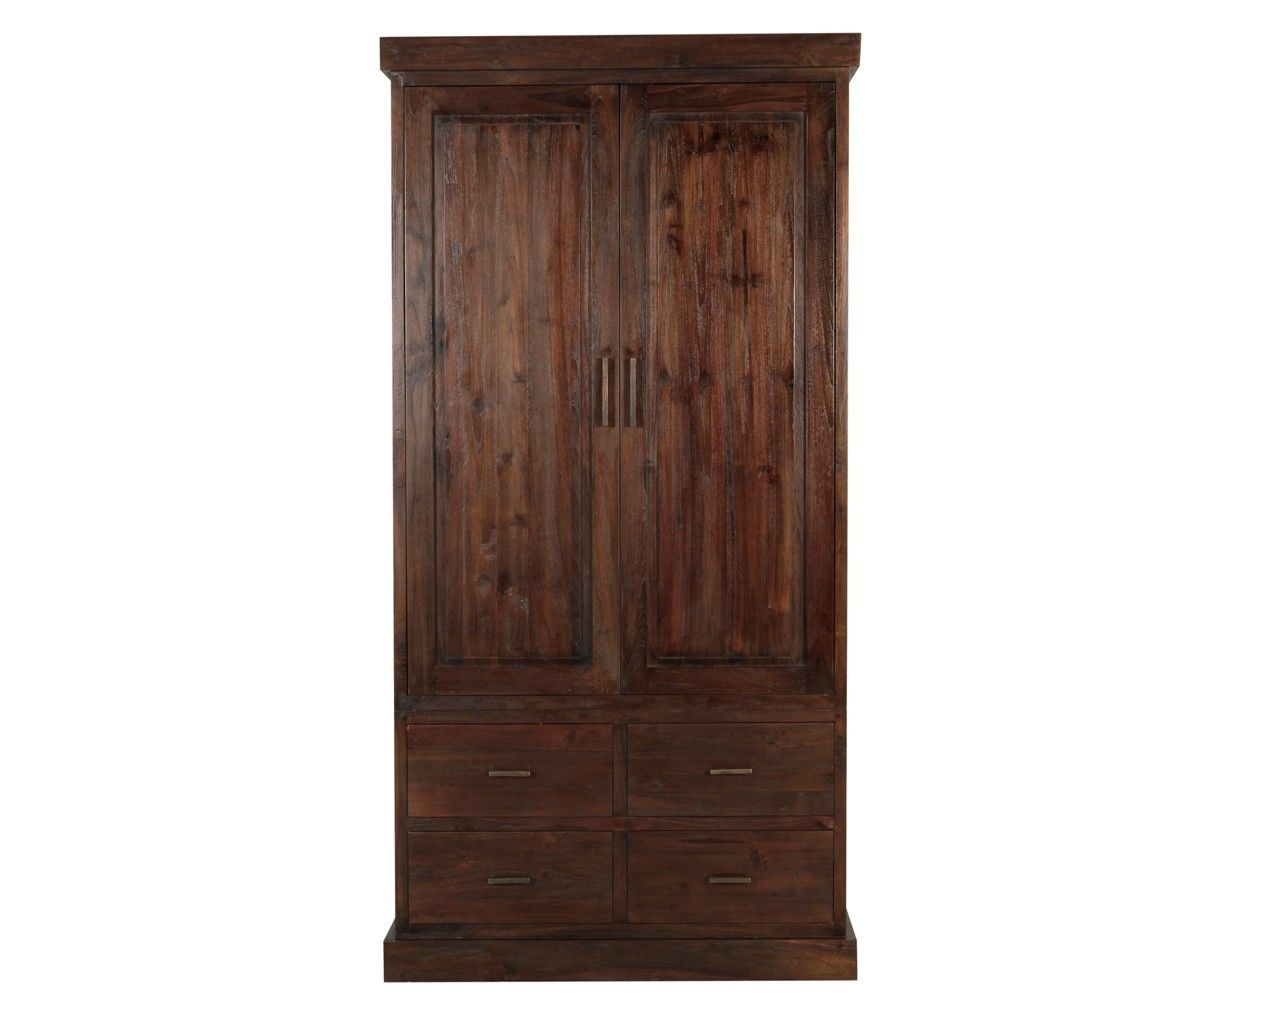 Most Recently Released Dark Wood Wardrobe Gumtree Childrens Painting A Antique Corner Pertaining To Dark Wood Wardrobes (View 1 of 15)